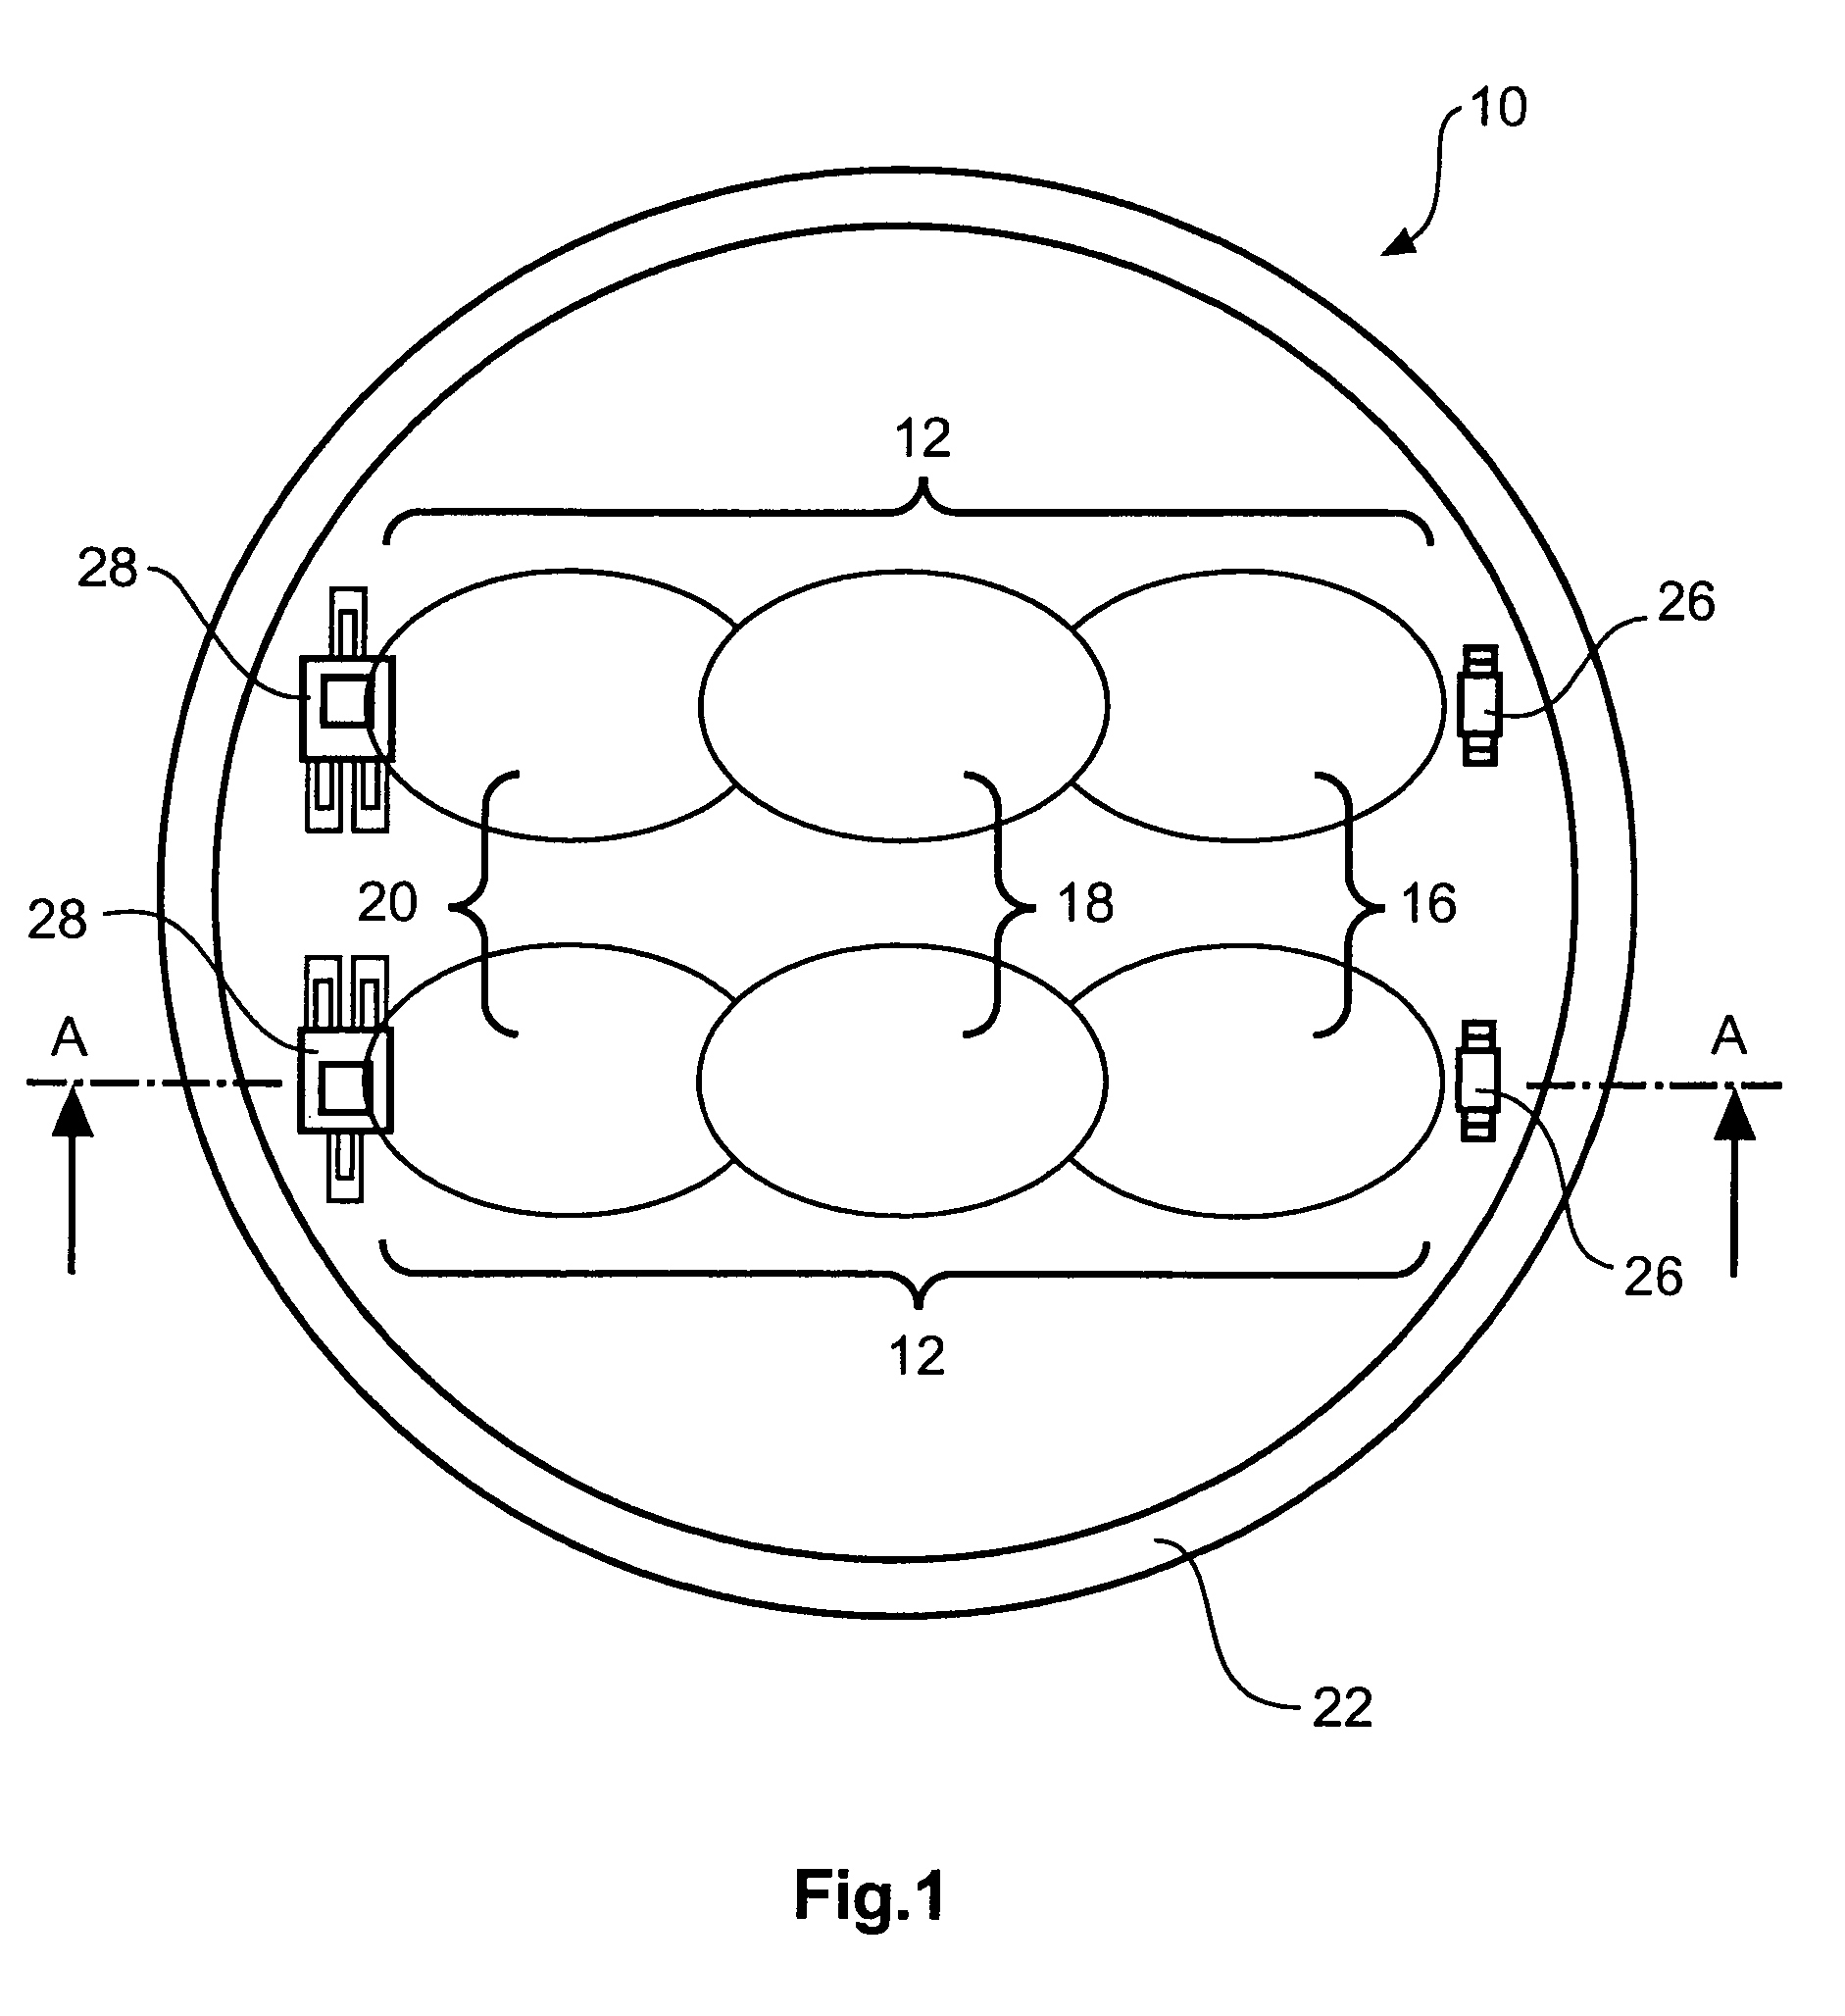 Optical sensor device for detecting wetting